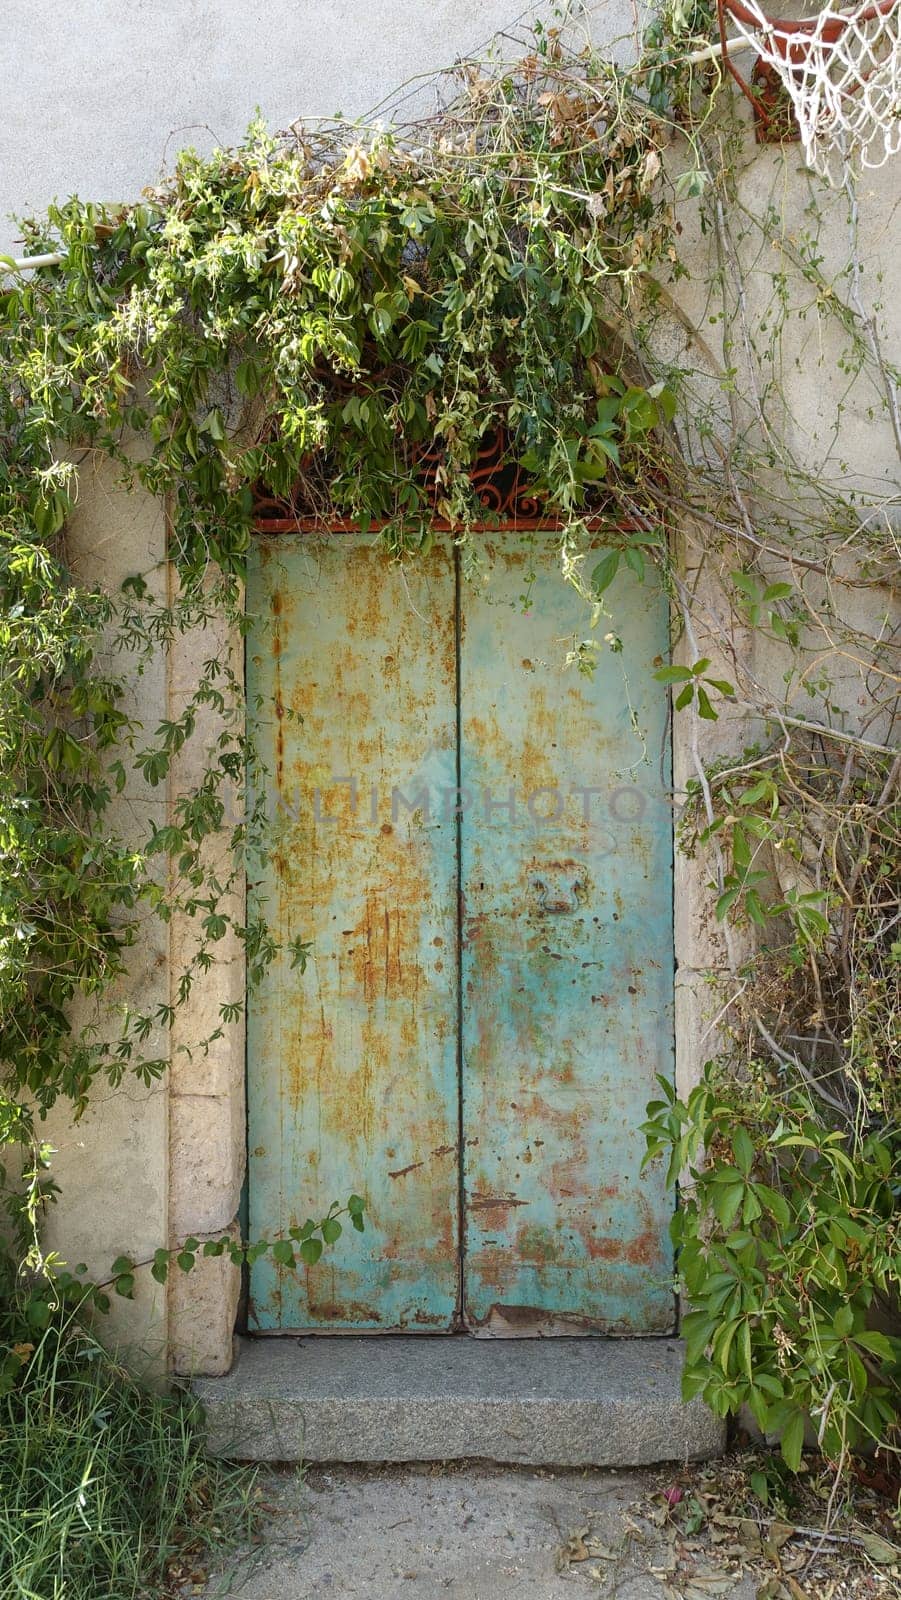 The door with metal swings of an ancient house in the countryside. by Jamaladeen